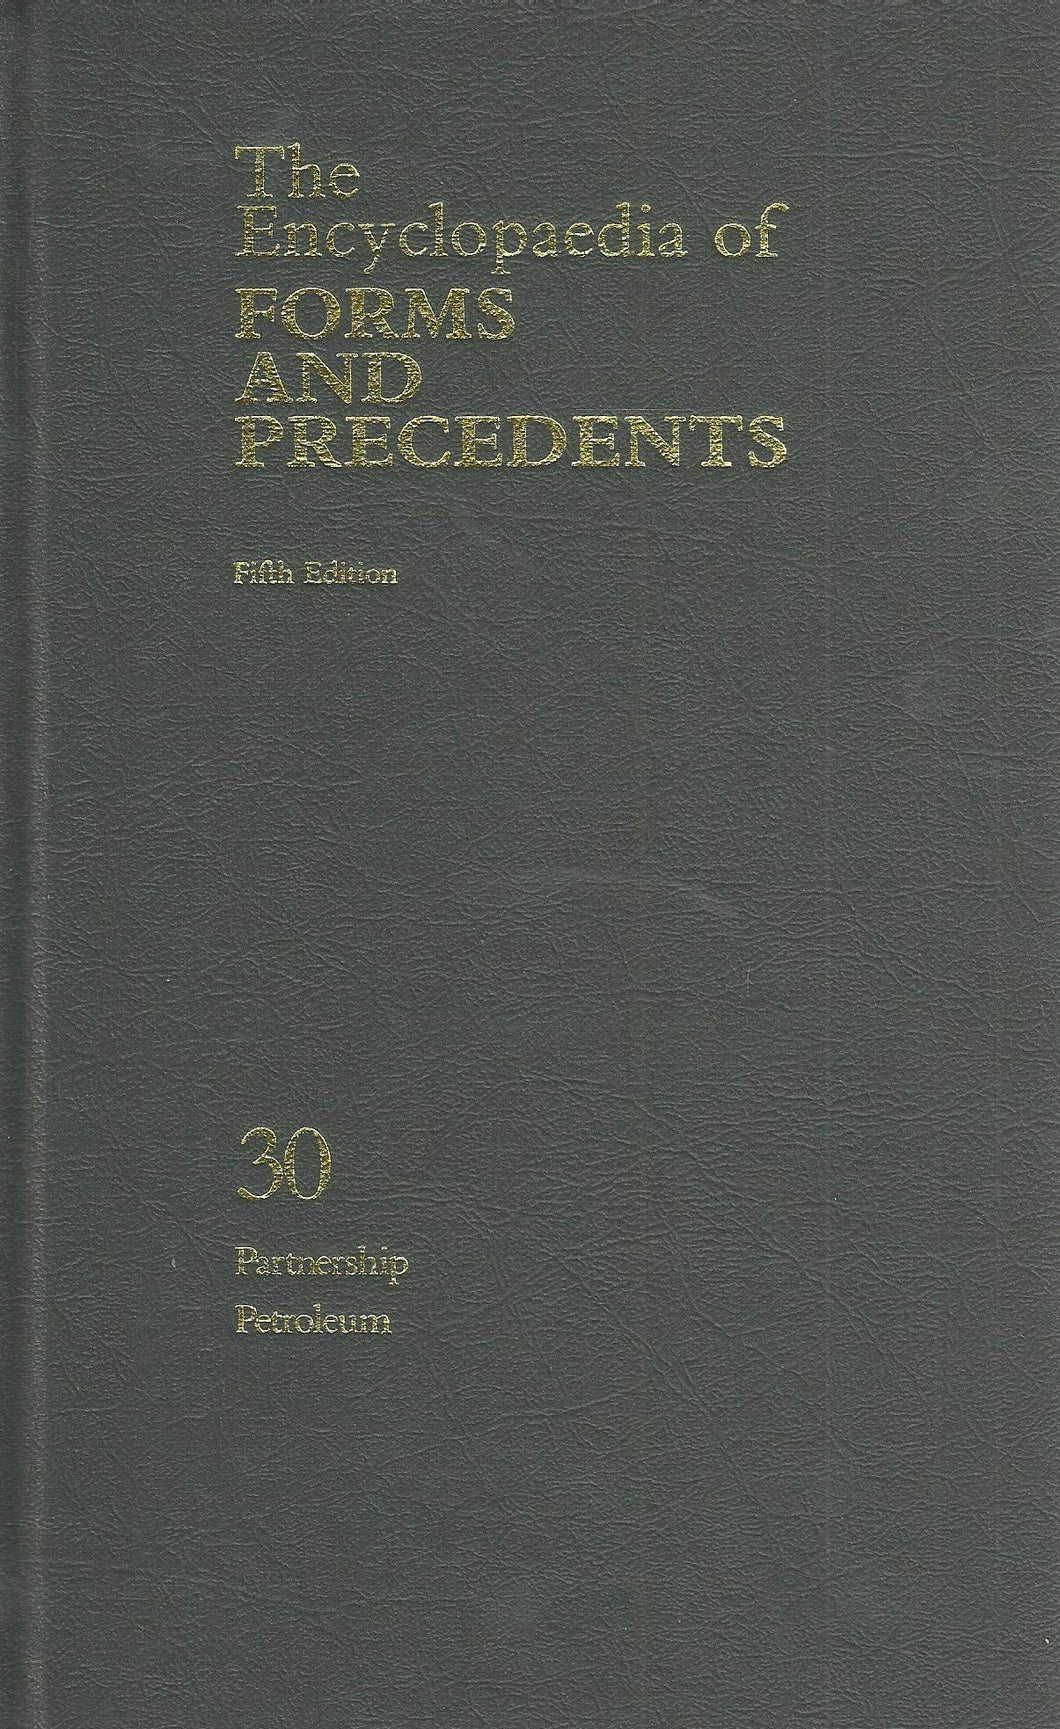 The Encyclopaedia of Forms and Precedents - Fifth Edition, 30: Partnership, Petroleum